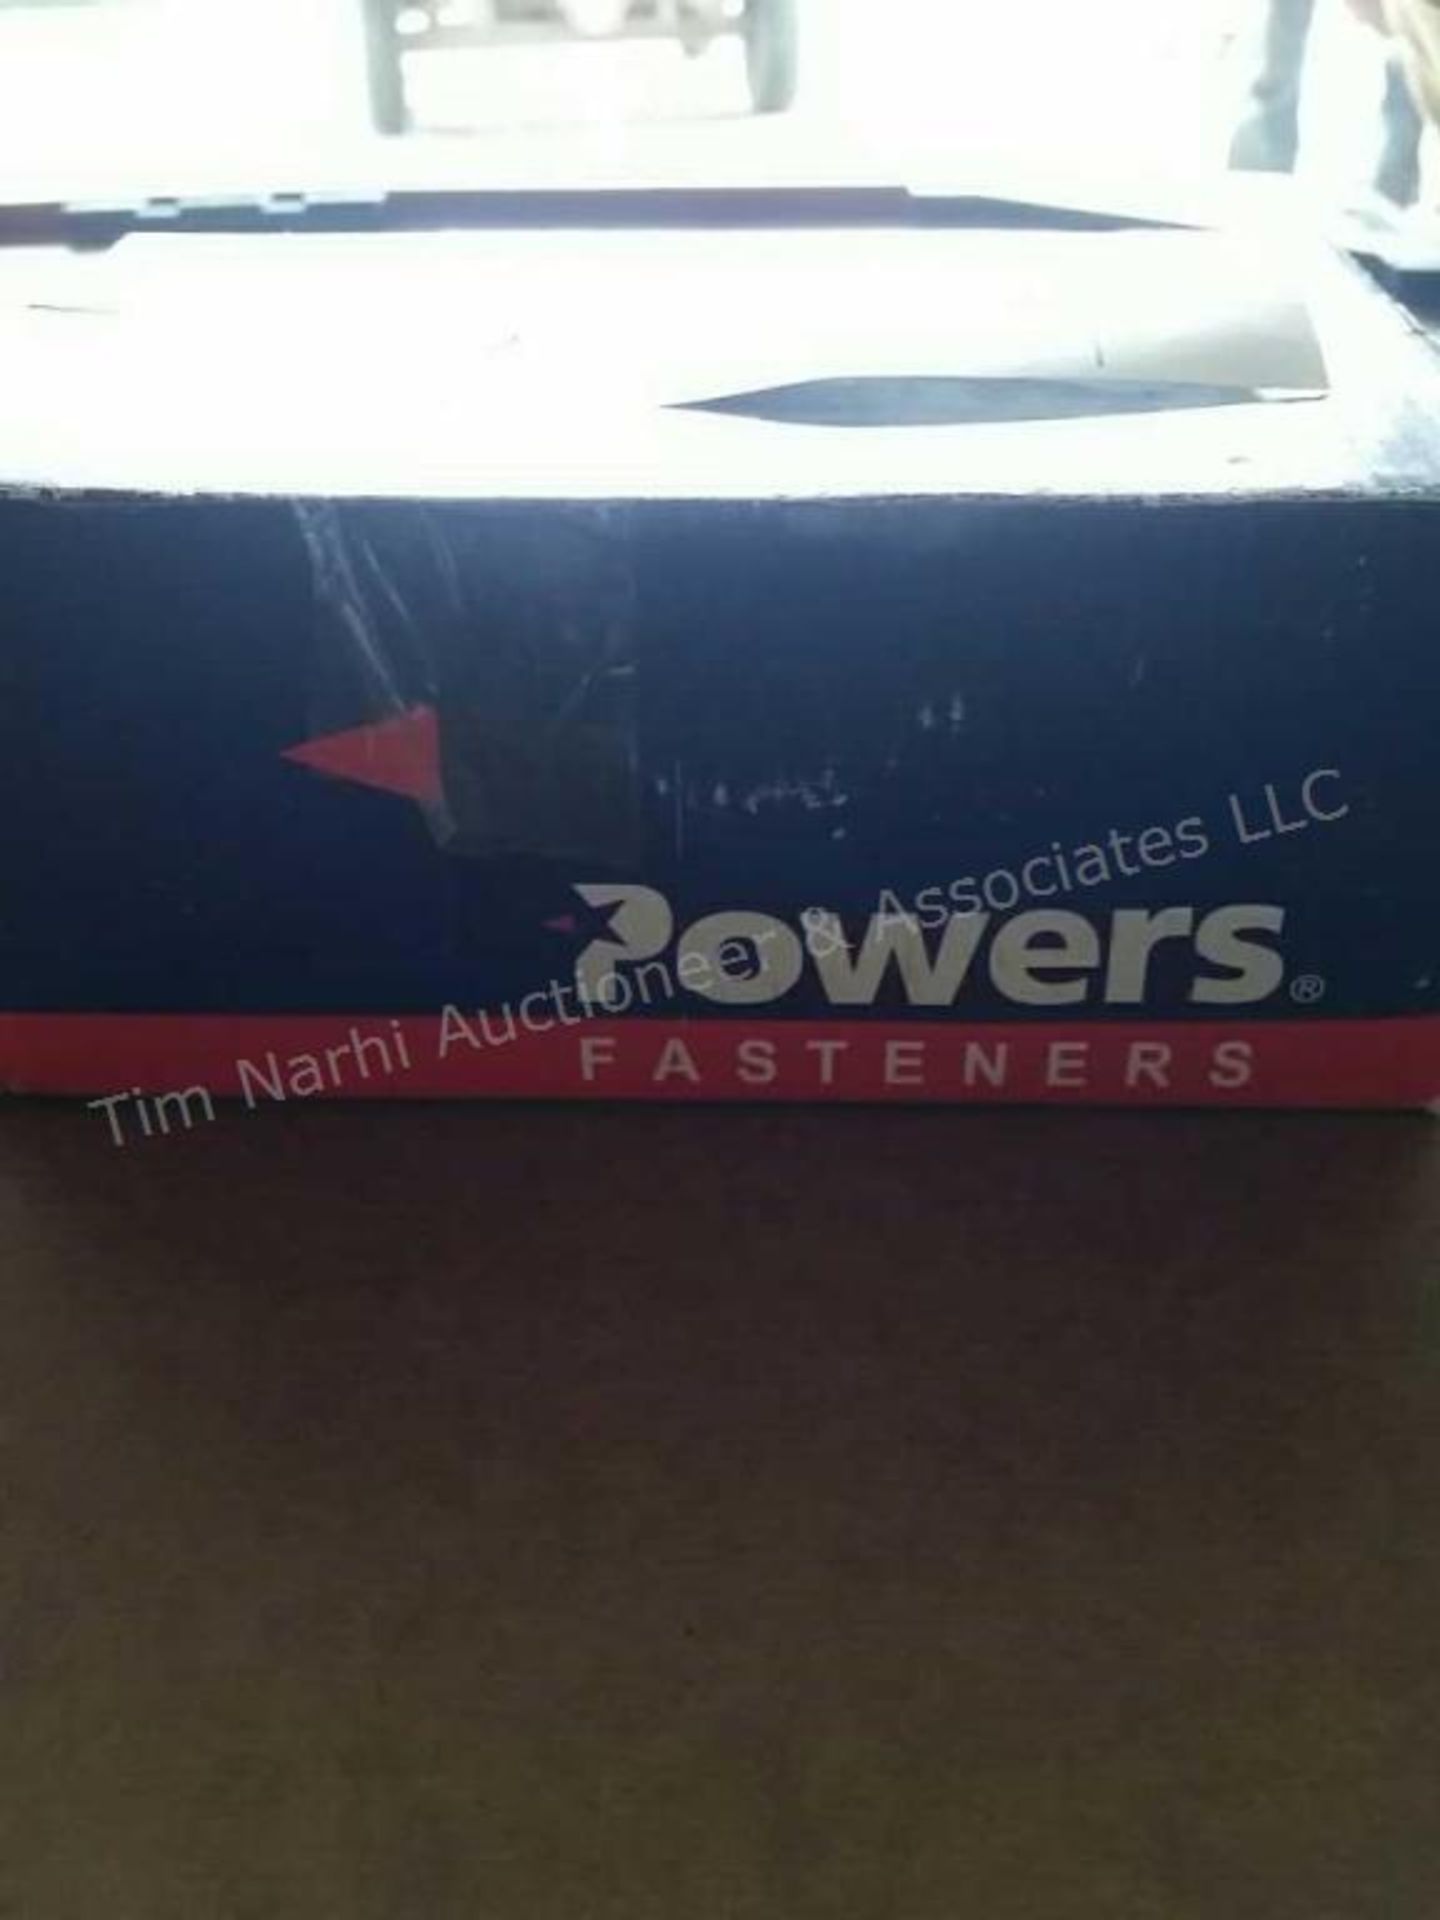 Powers fasteners - Image 3 of 3